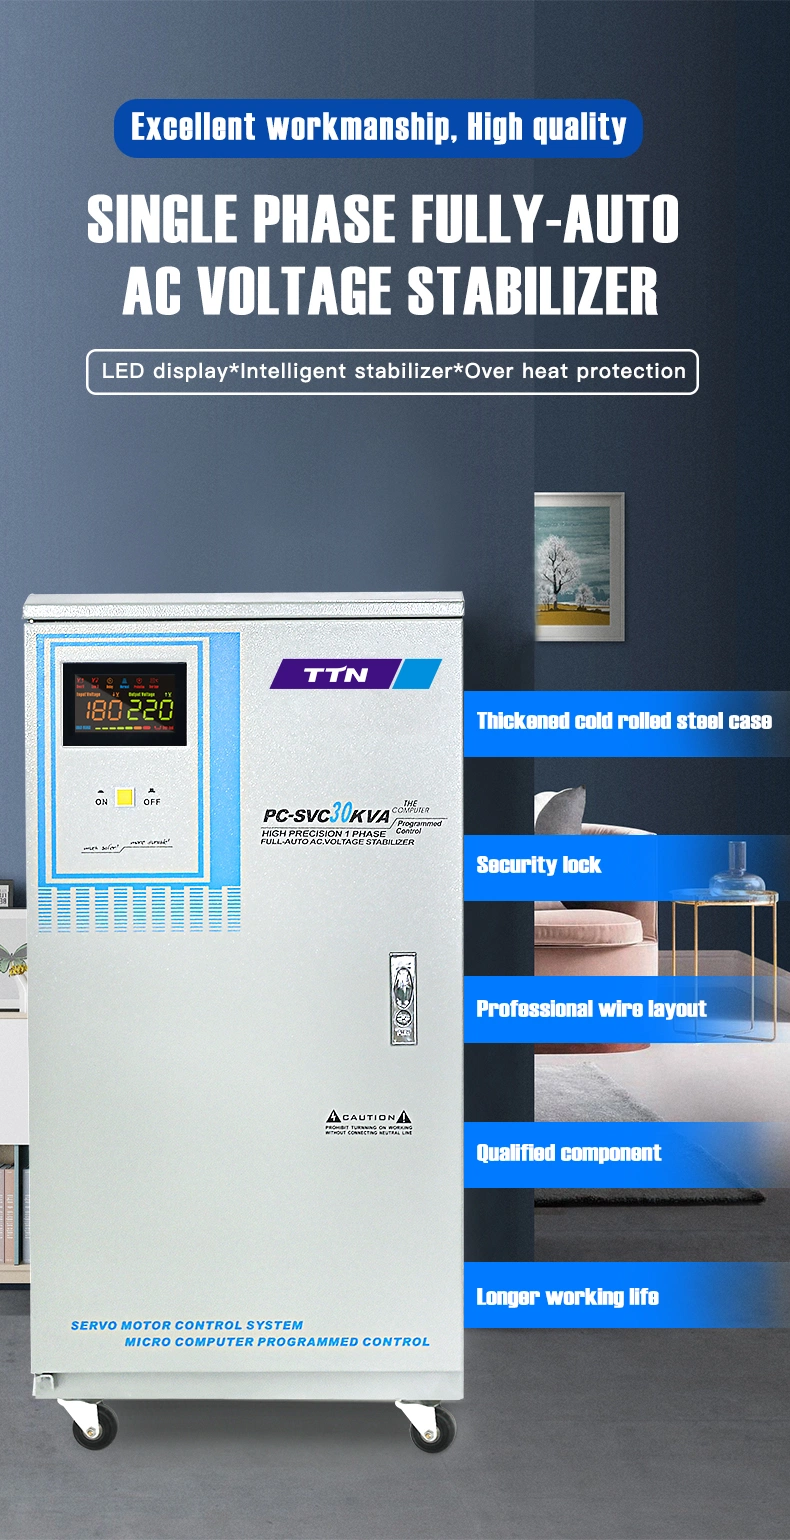 High Efficiency Servo Motor Control Model Pcsvc-10000va Three Phase Automatic Voltage Stabilizer with Micro Computer Programmed Control